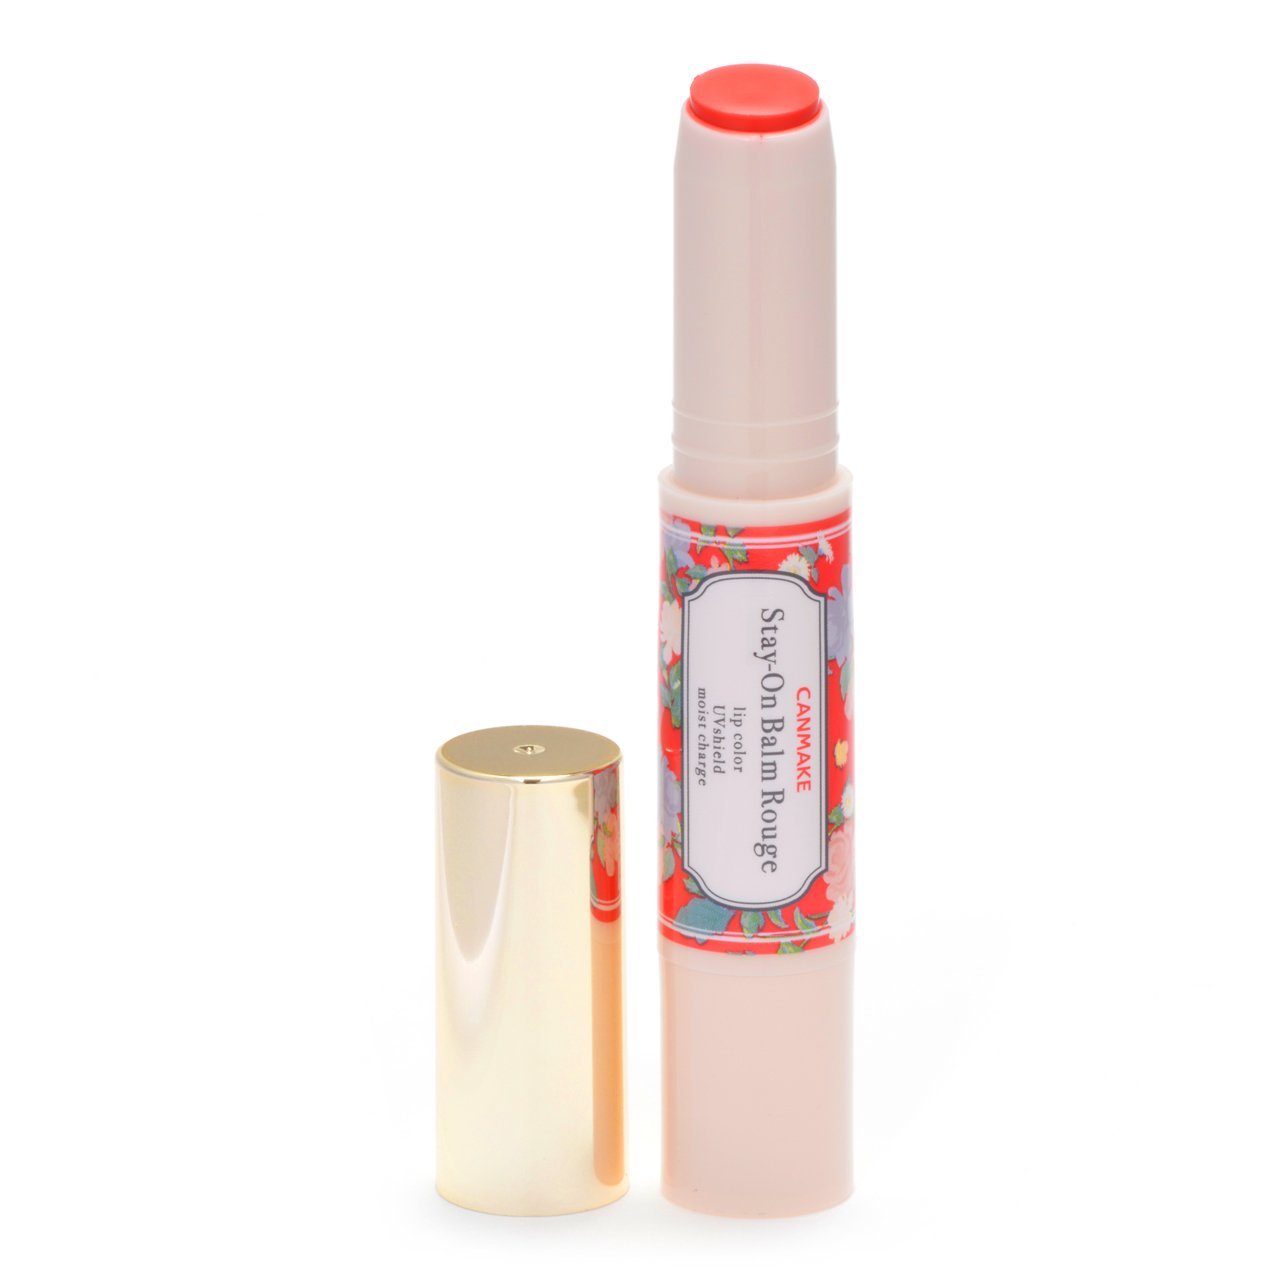 Canmake Stay - On Balm Rouge 14 Poppy Bouquet 2.8g Lip Care Product